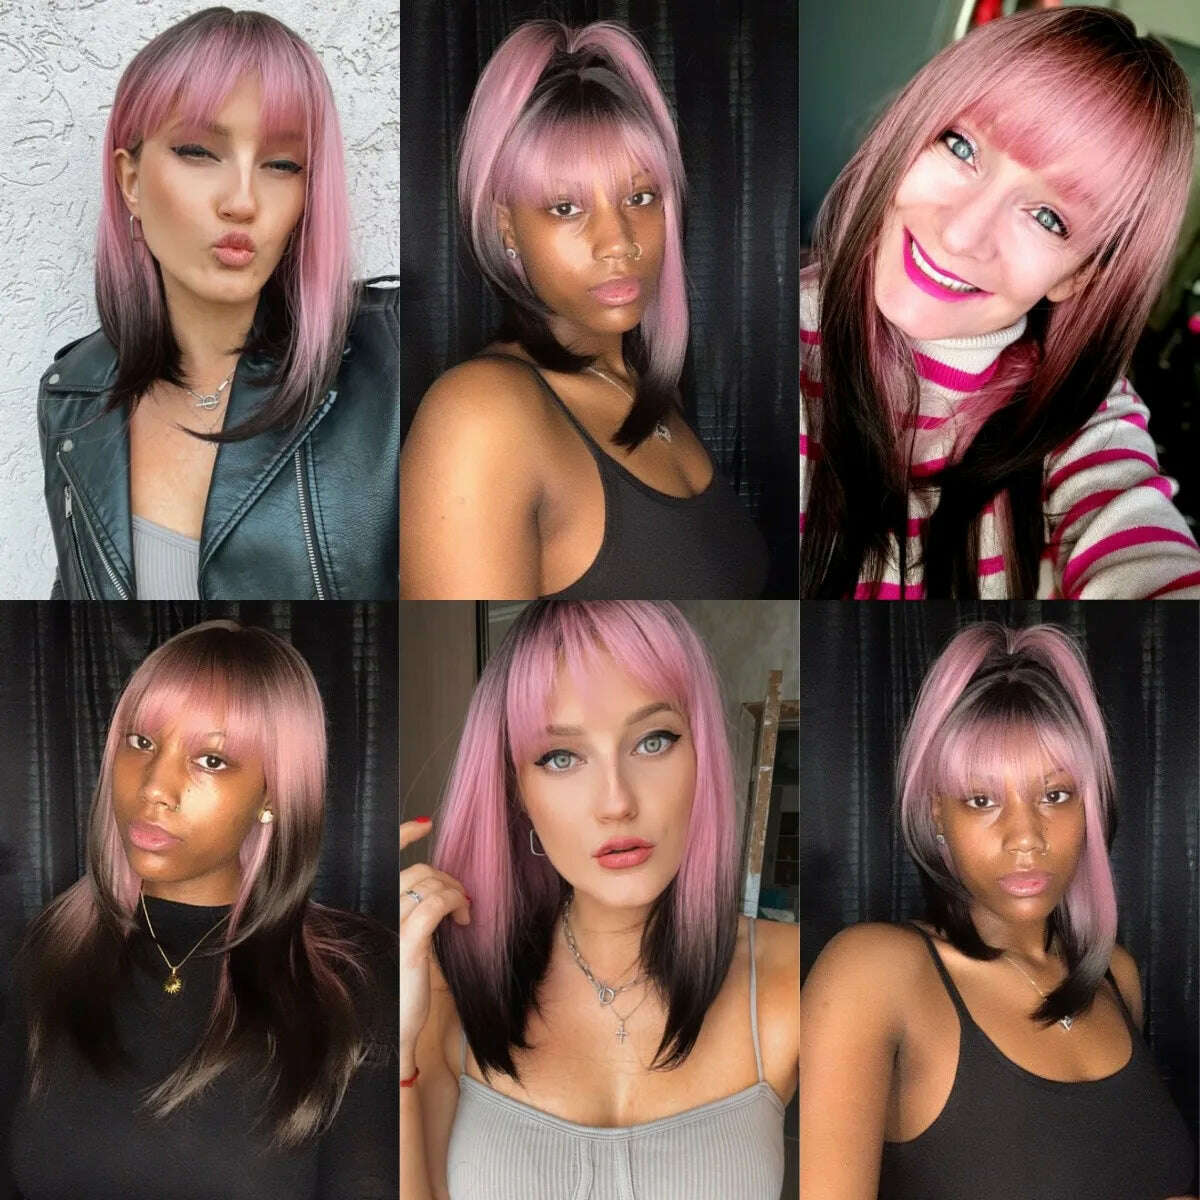 KIMLUD, Purple Pink Ombre Black Short Straight Synthetic Wigs with Bangs Bob Wig for Women Daily Cosplay Party Heat Resistant Fake Hairs, KIMLUD Women's Clothes